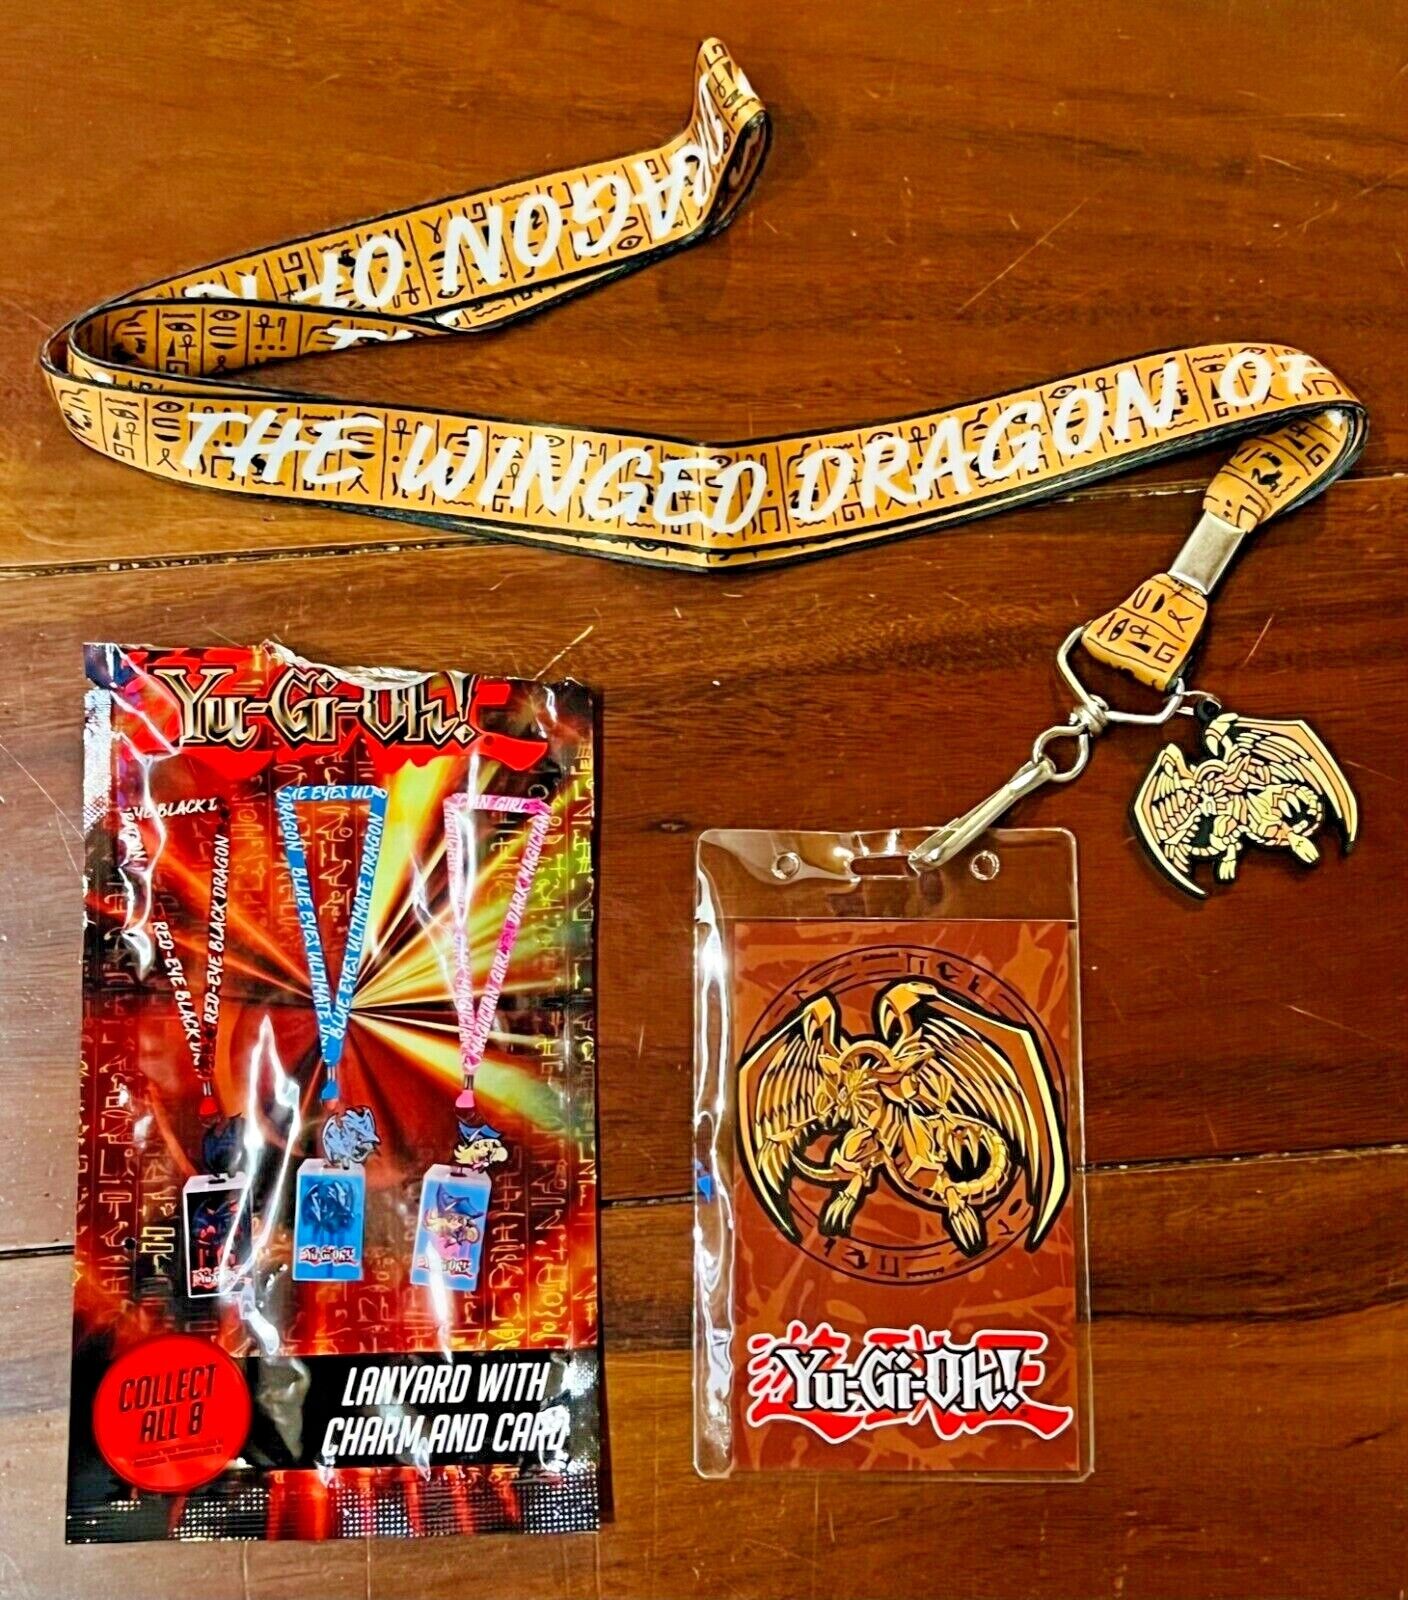 Yugioh Yu-gi-oh Lanyard with Charm and Card Pick Your Character 